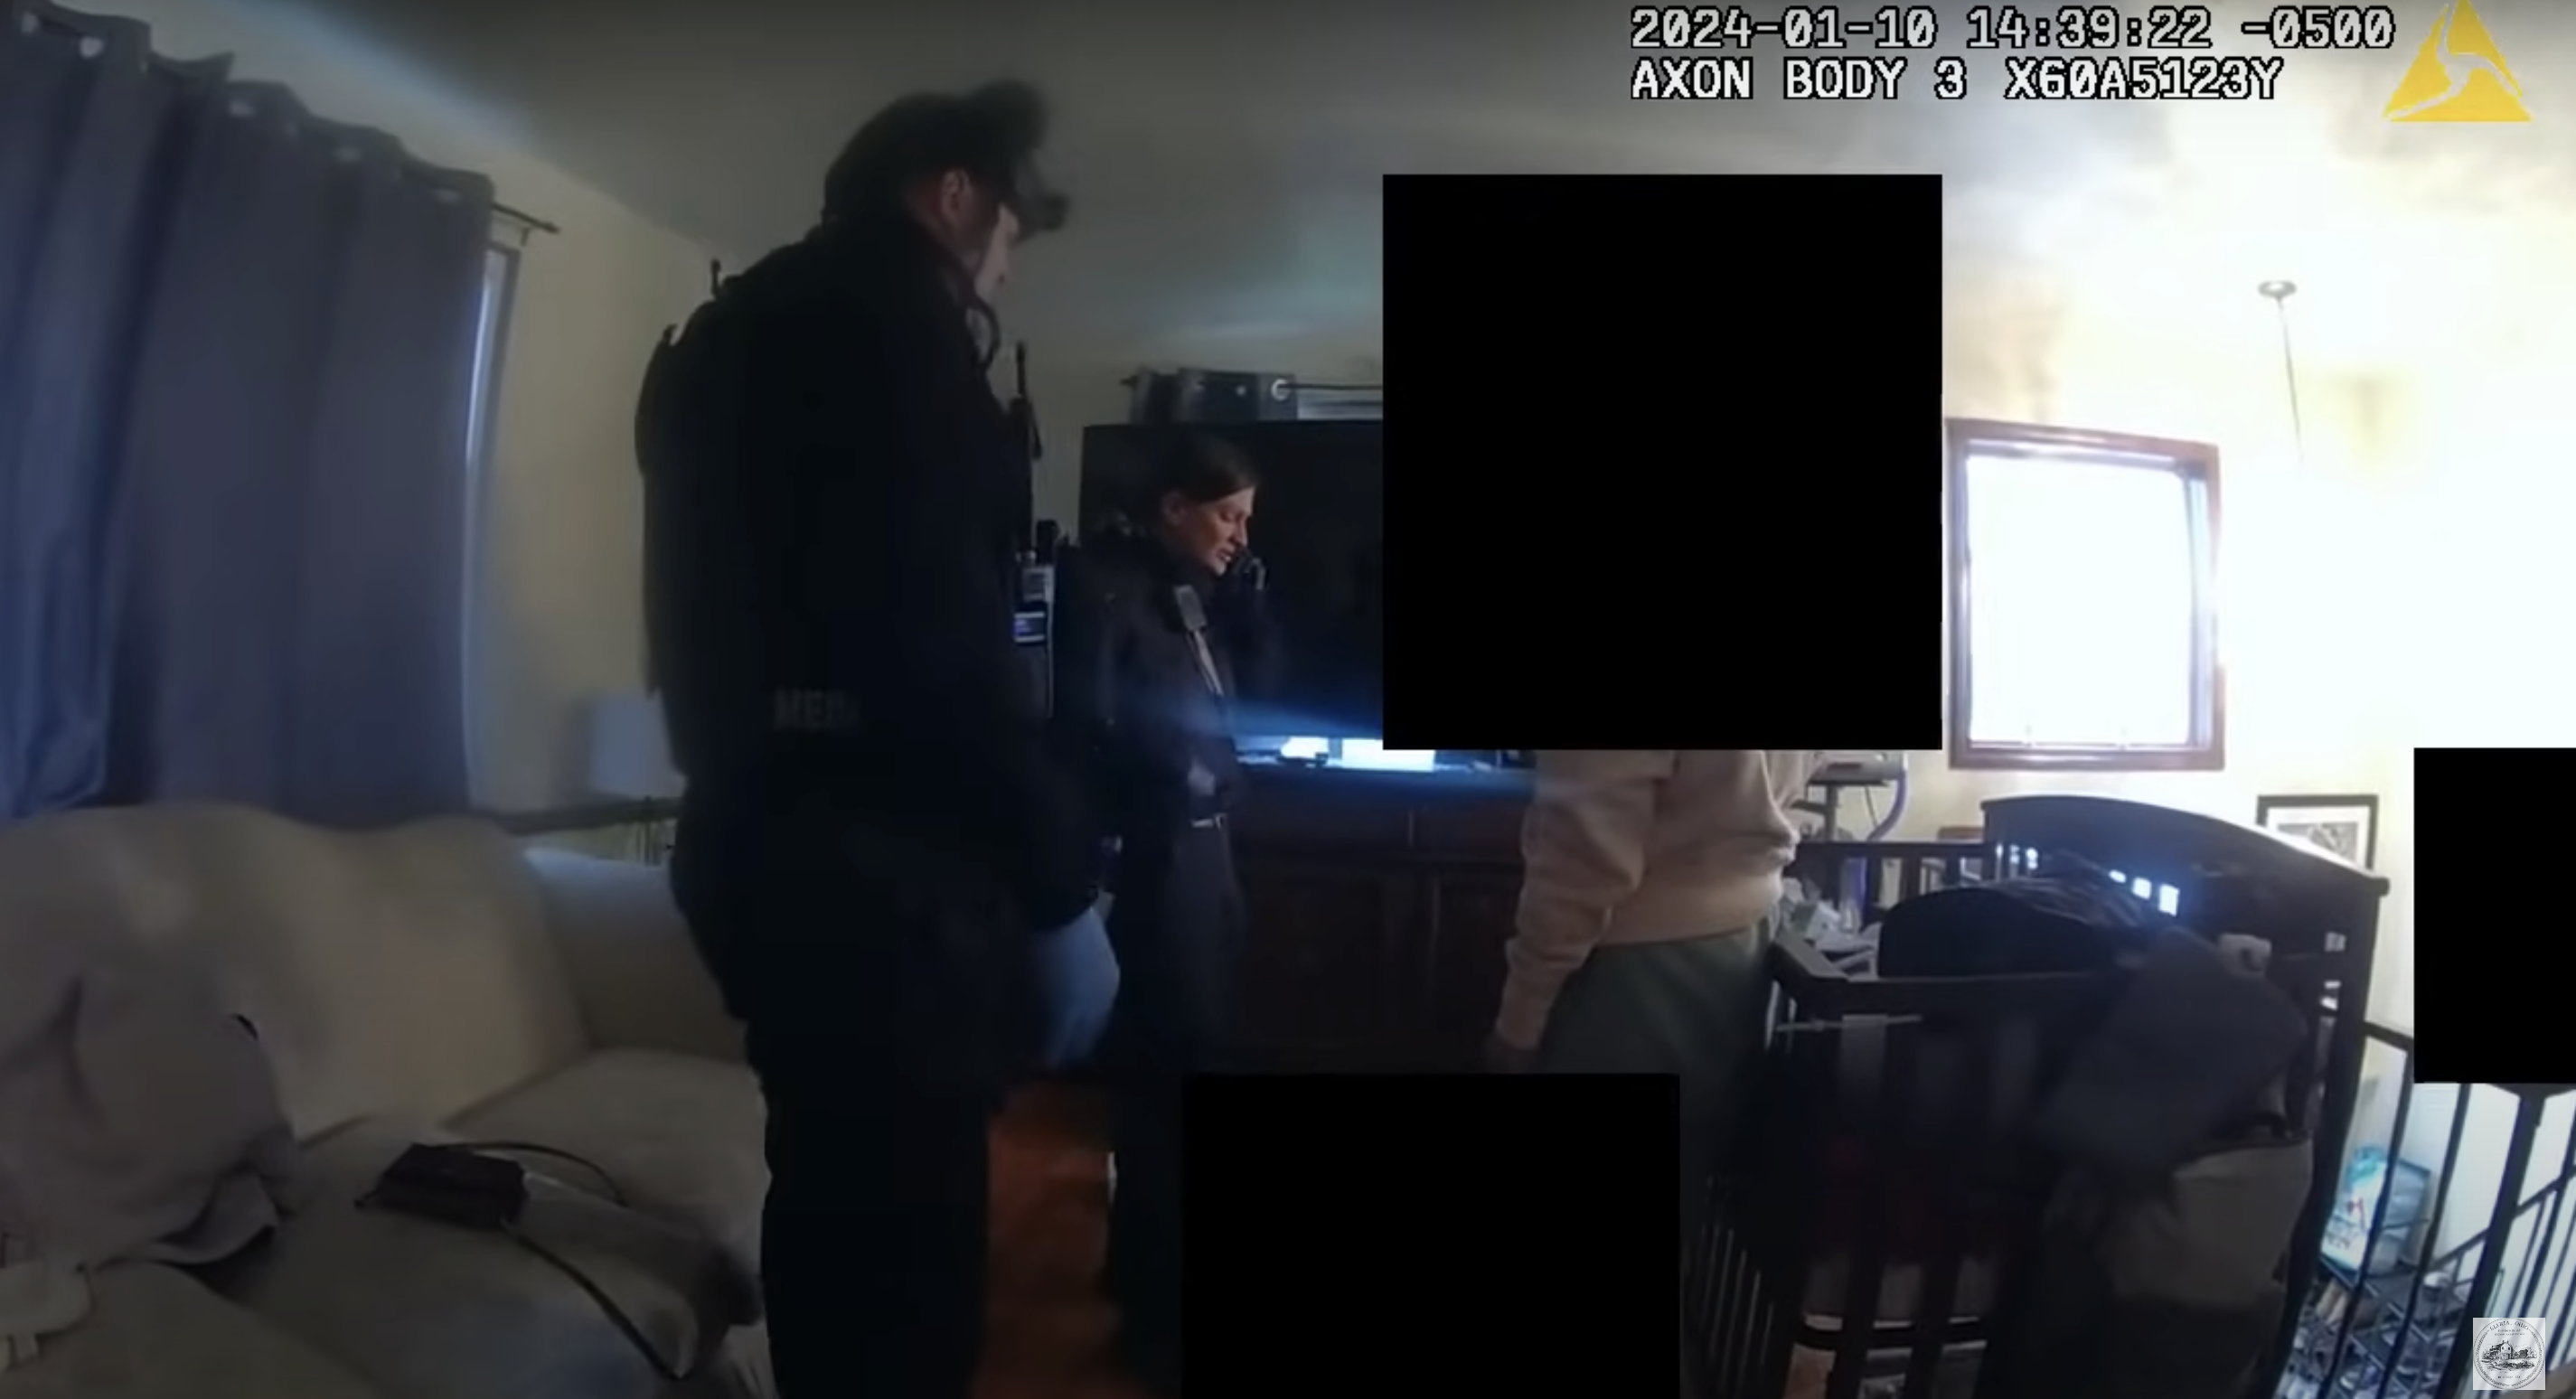 Police officers standing near Waylon's crib, as seen in a video dated January 17, 2024 | Source: youtube.com/CityofElyriaChannel